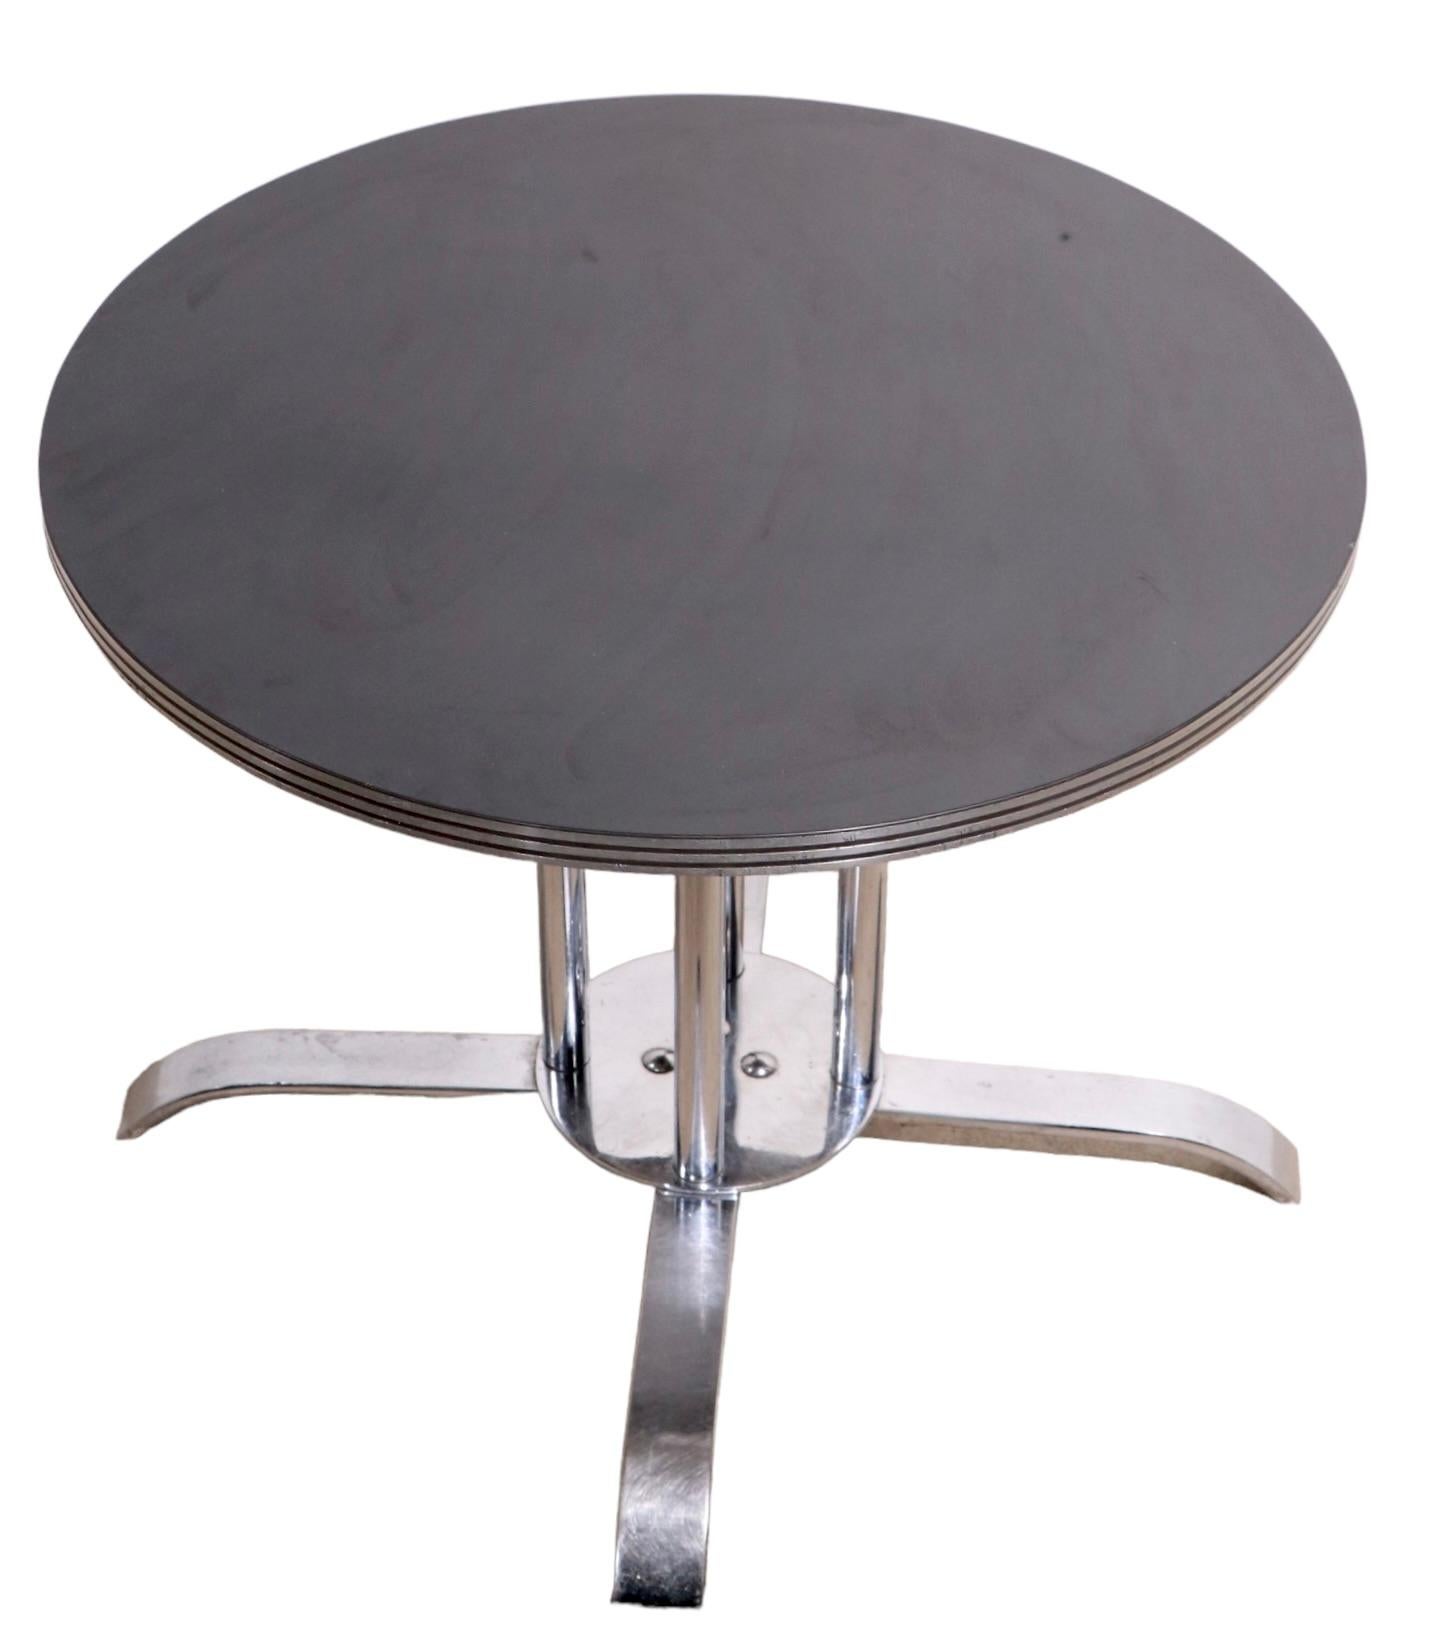 American Art Deco Machine Age Chrome Table by McKay Craft Furniture Made in USA c 1930's For Sale